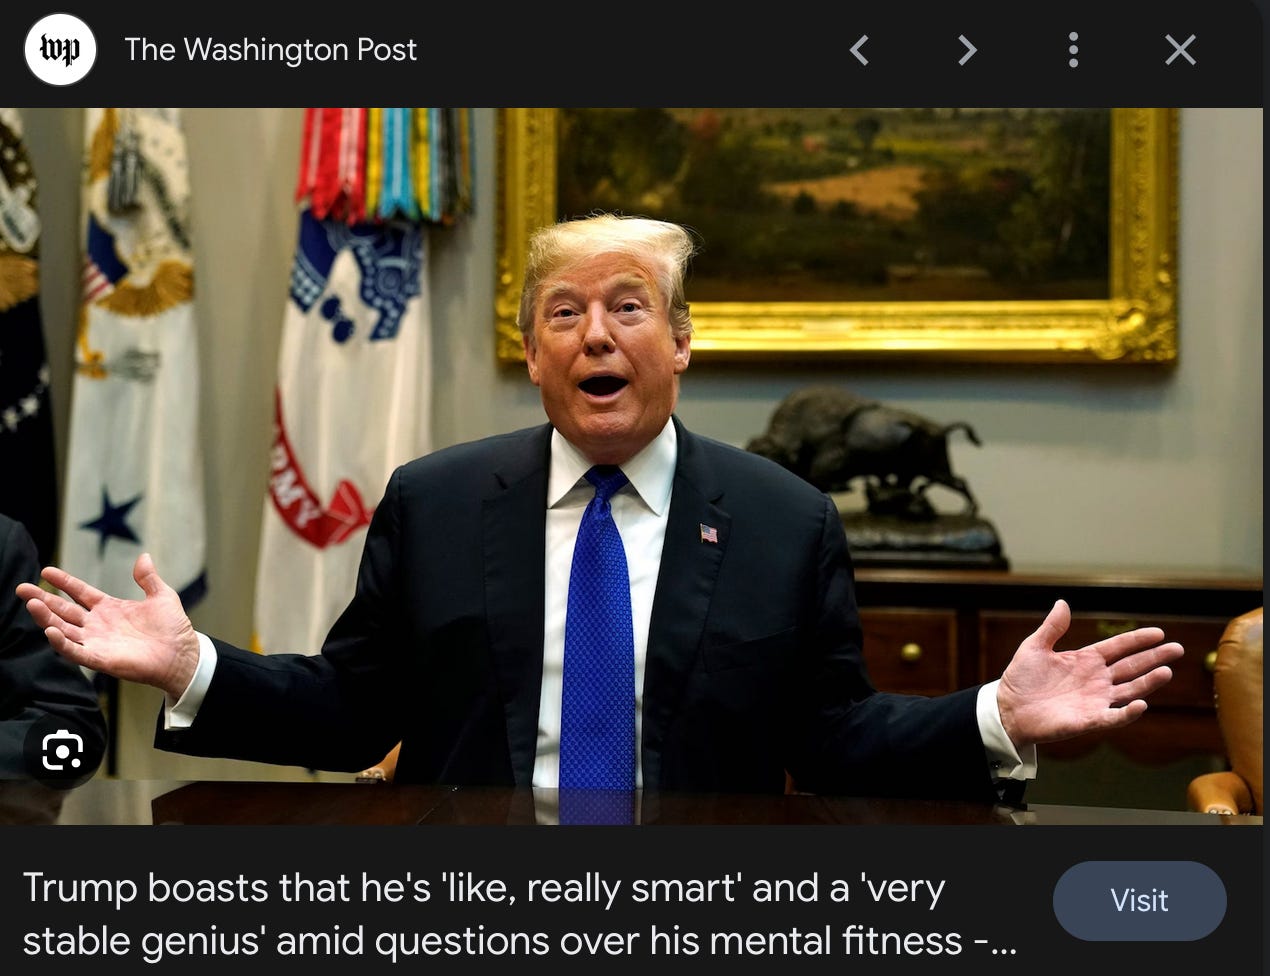 Trump boasting that he is really really smart